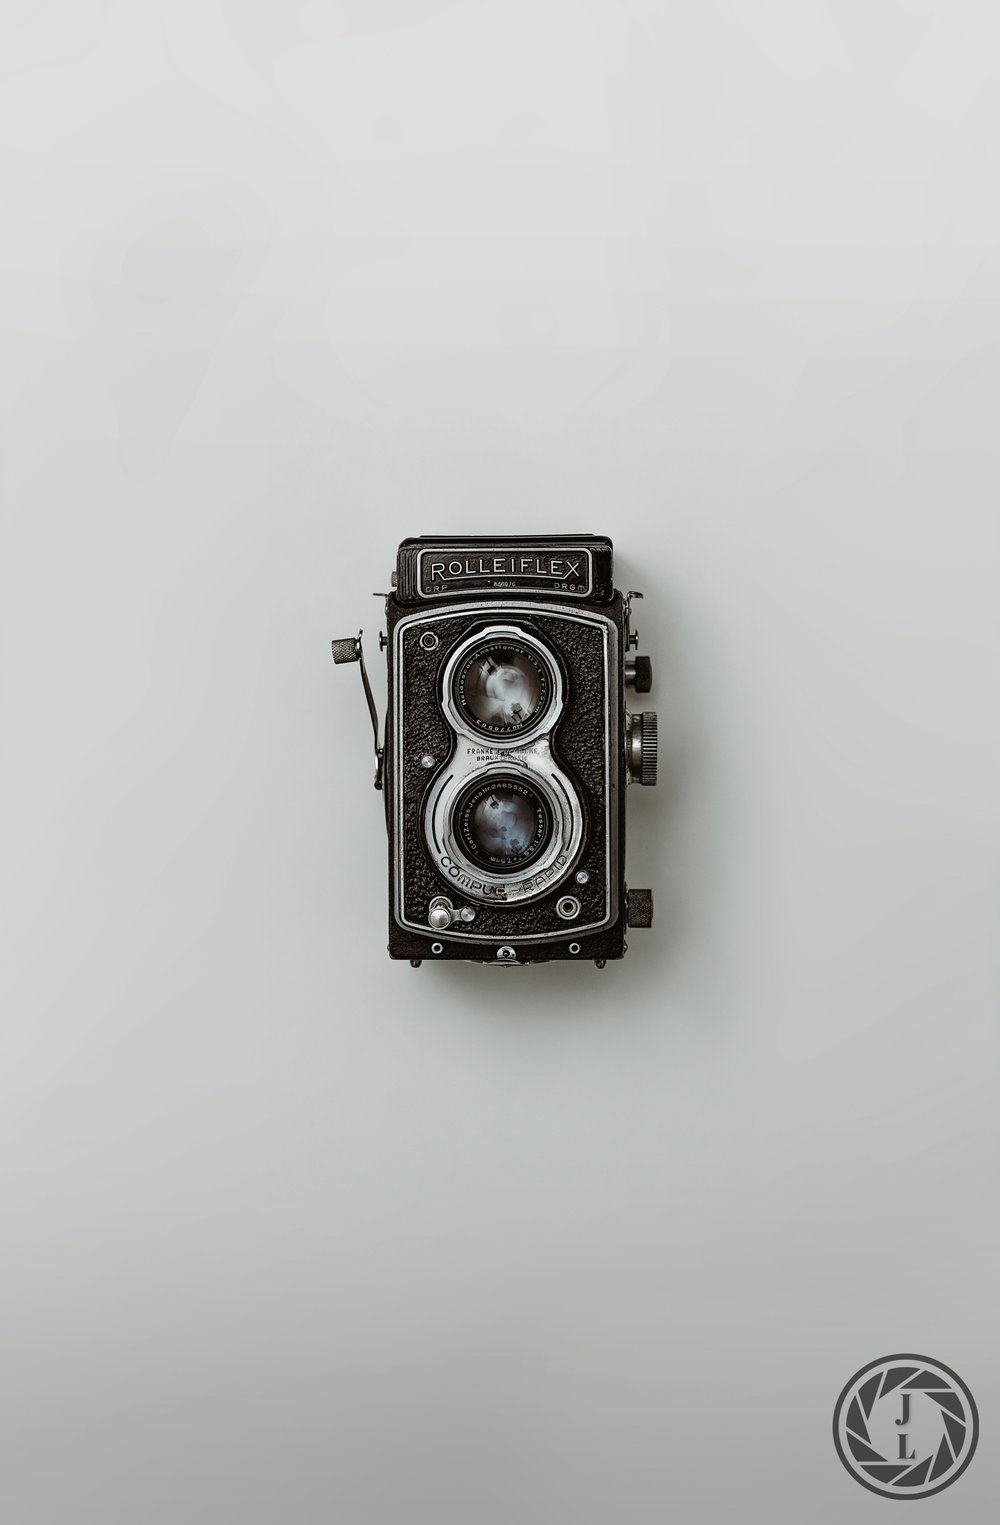  image of an old rolleiflex camera 